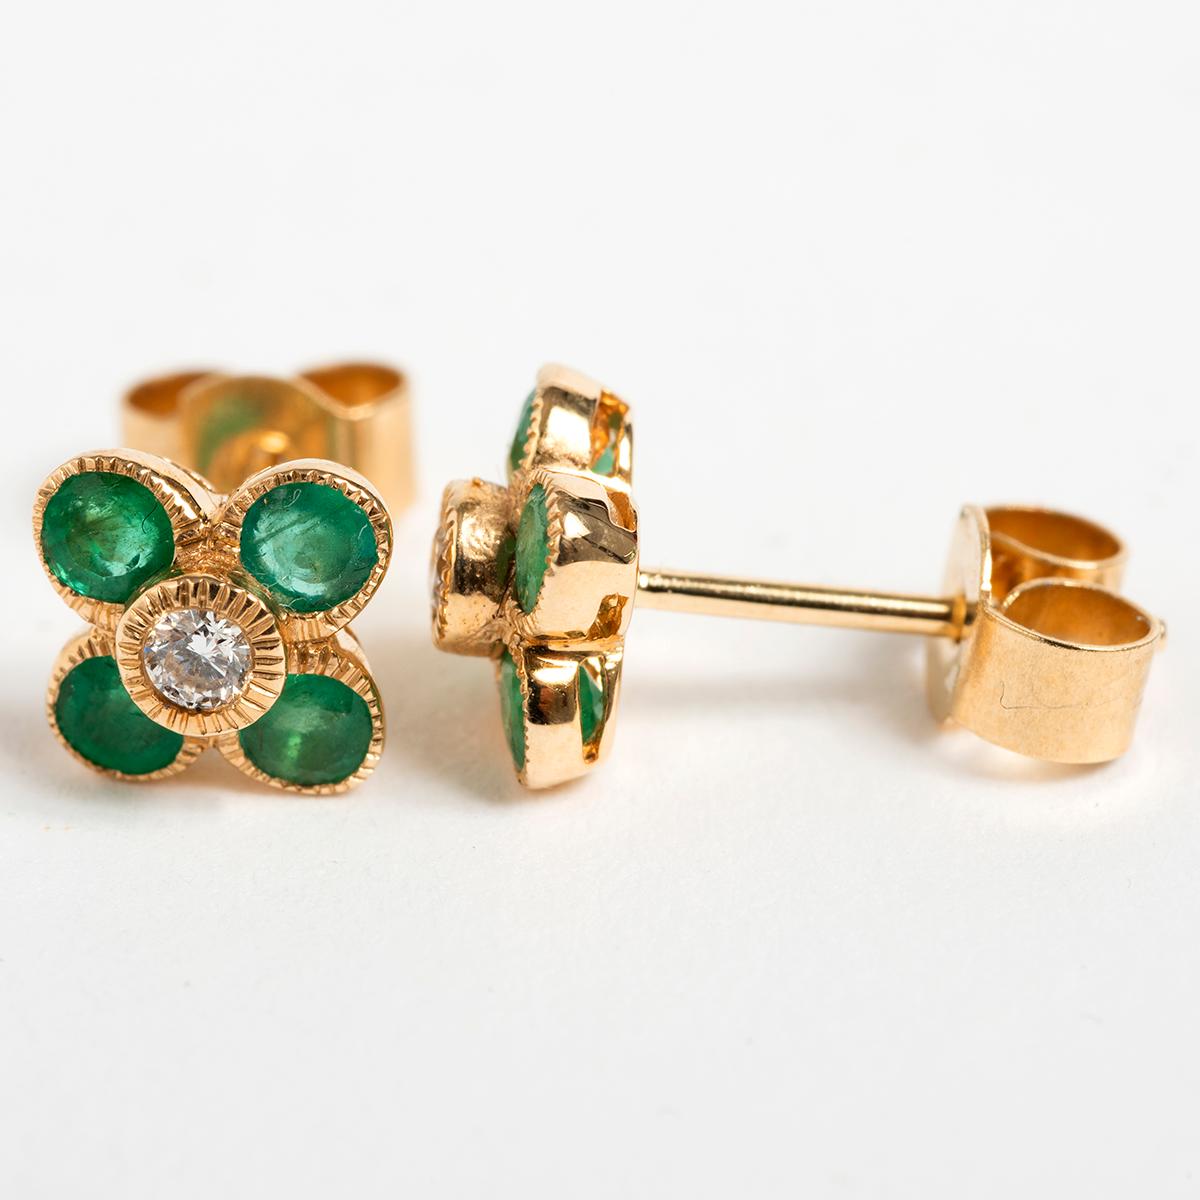 A unique piece within our carefully curated Vintage & Prestige fine jewellery collection, we are delighted to present the following: These pretty petal shaped emerald and diamond earrings are .06 carat, measuring 5mm x 5mm.